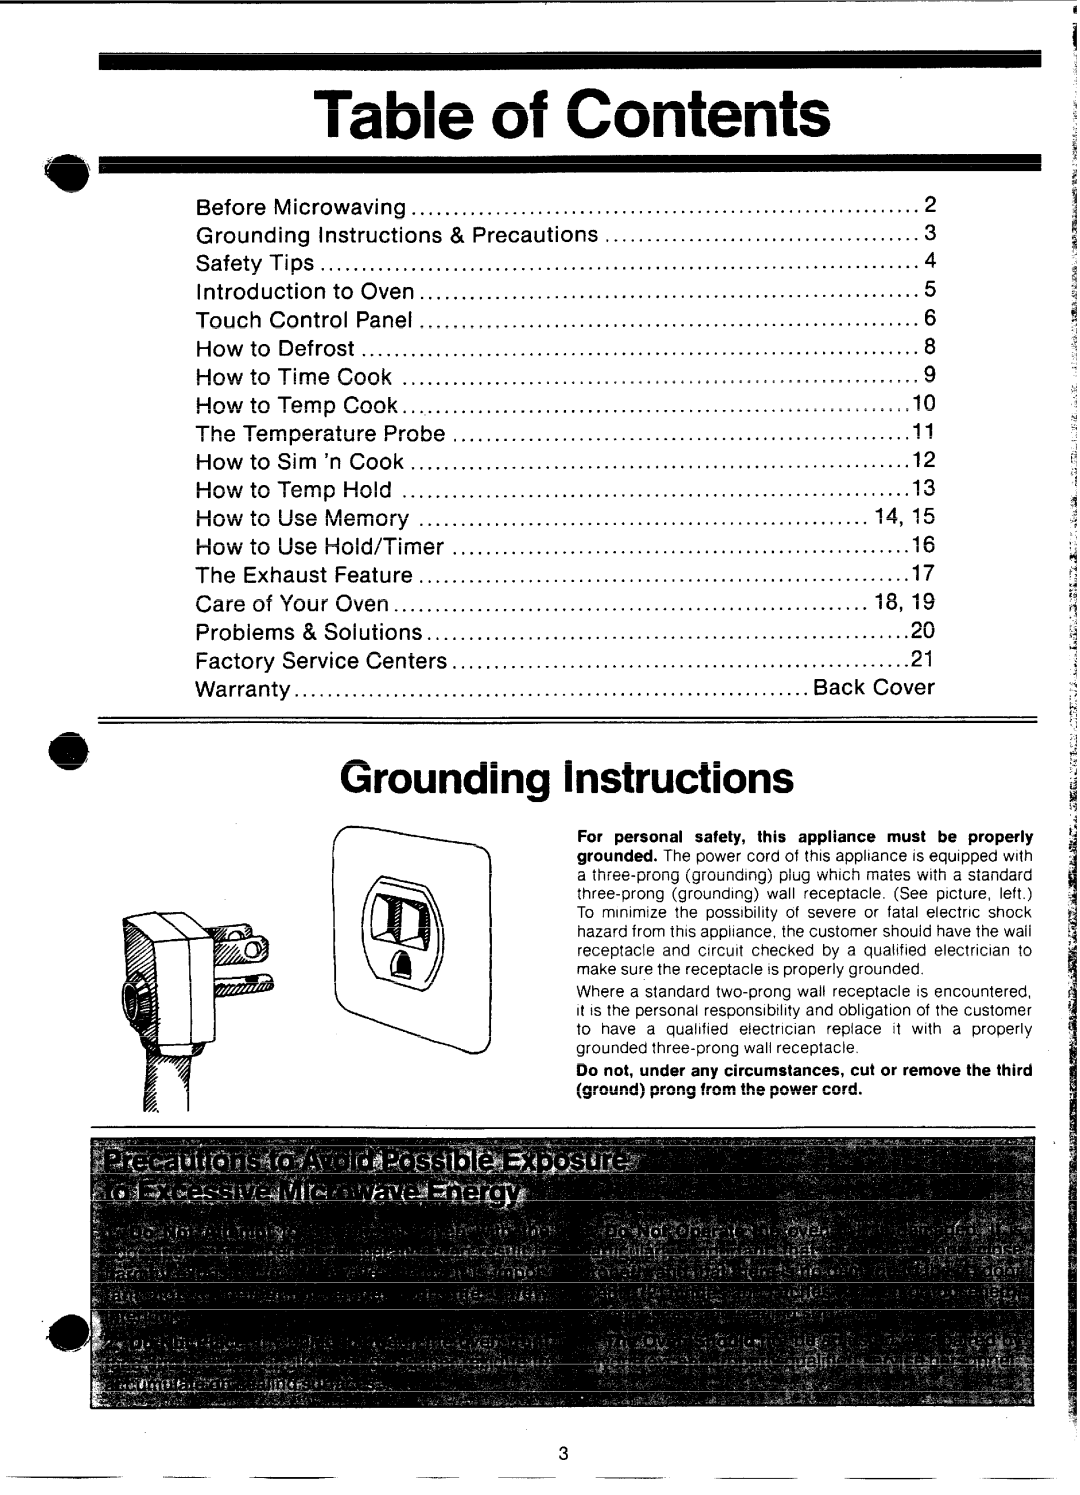 GE JVM57, 862A300PI, 49-4492 manual Table of Contents, Grounding, Instructions 